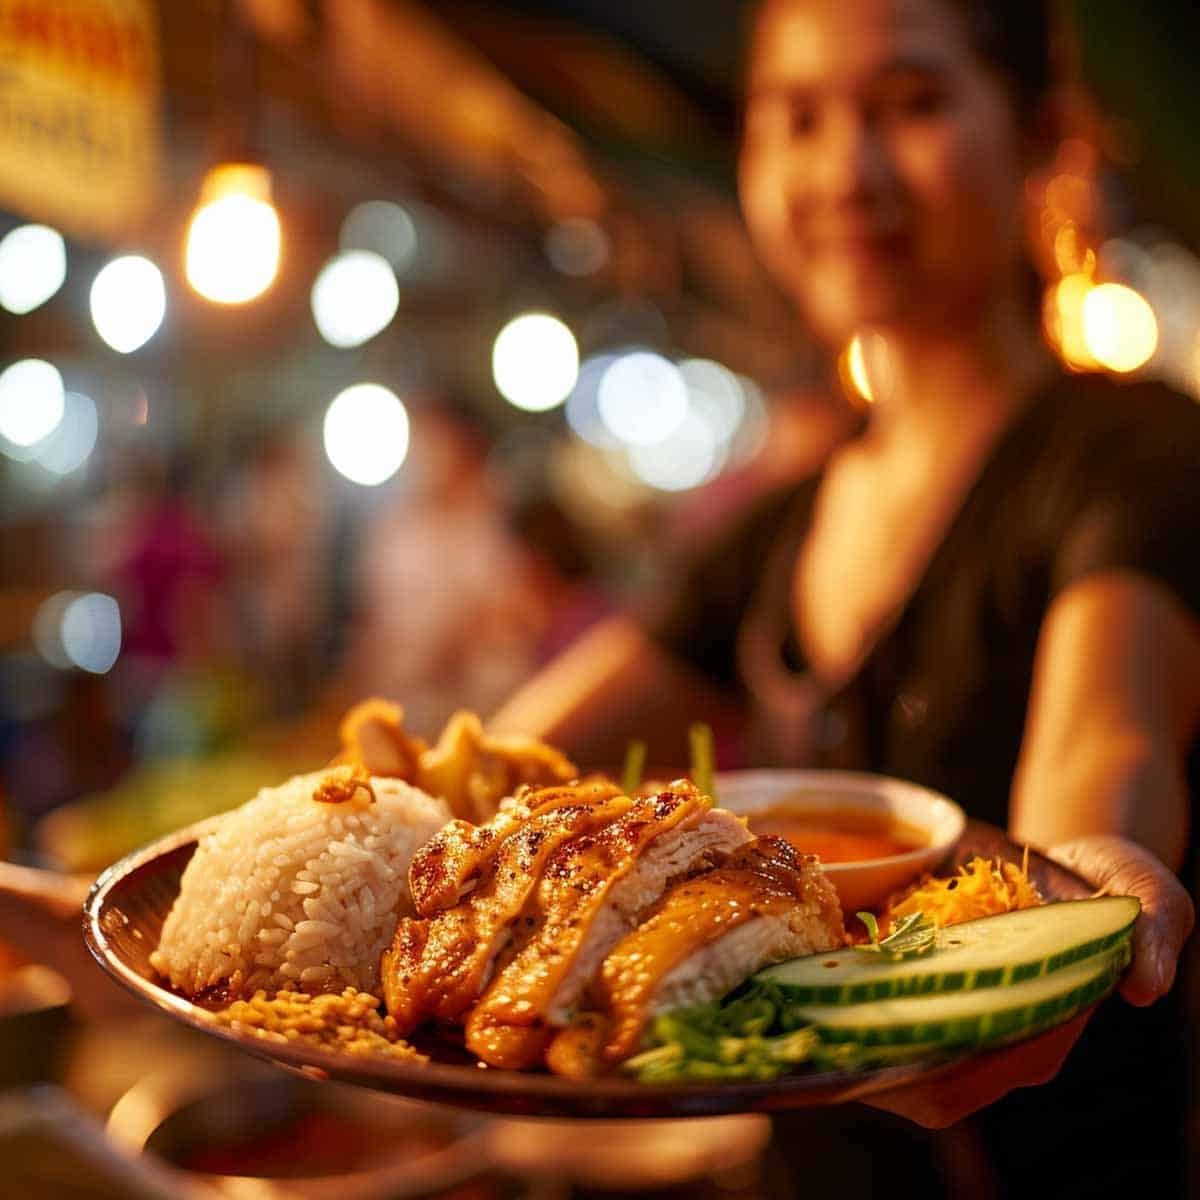 Thai woman serving a plate of Khao Man Gai, Thai-style chicken and rice.